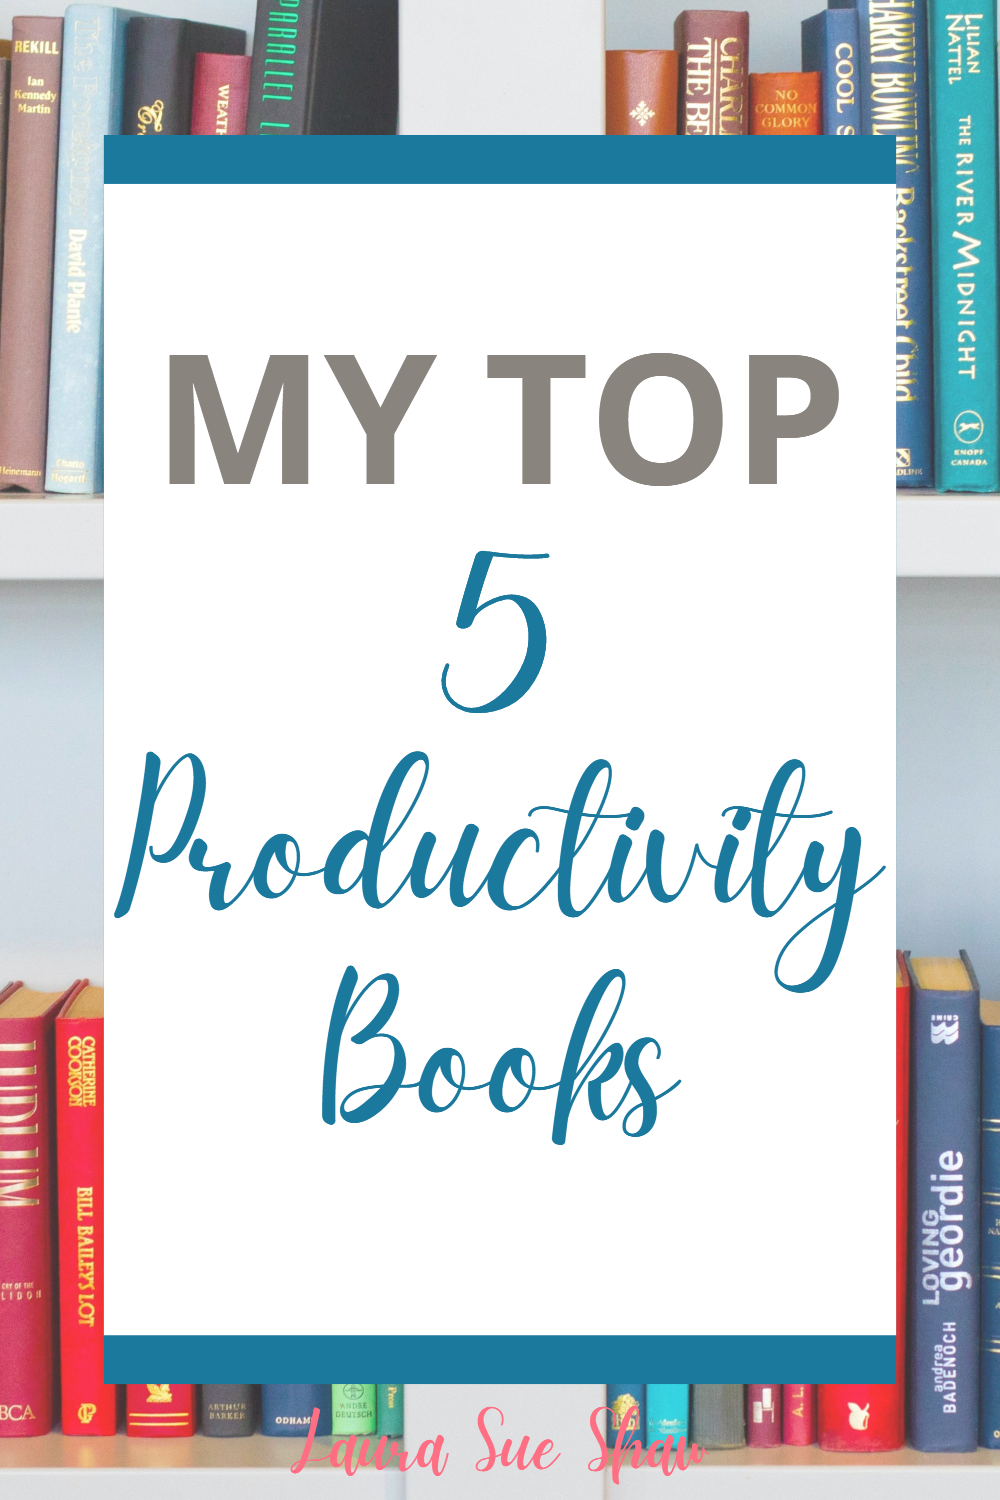 I love good productivity tips. I’ve read a lot of books on the topic and wanted to share some of my favorite productivity books.